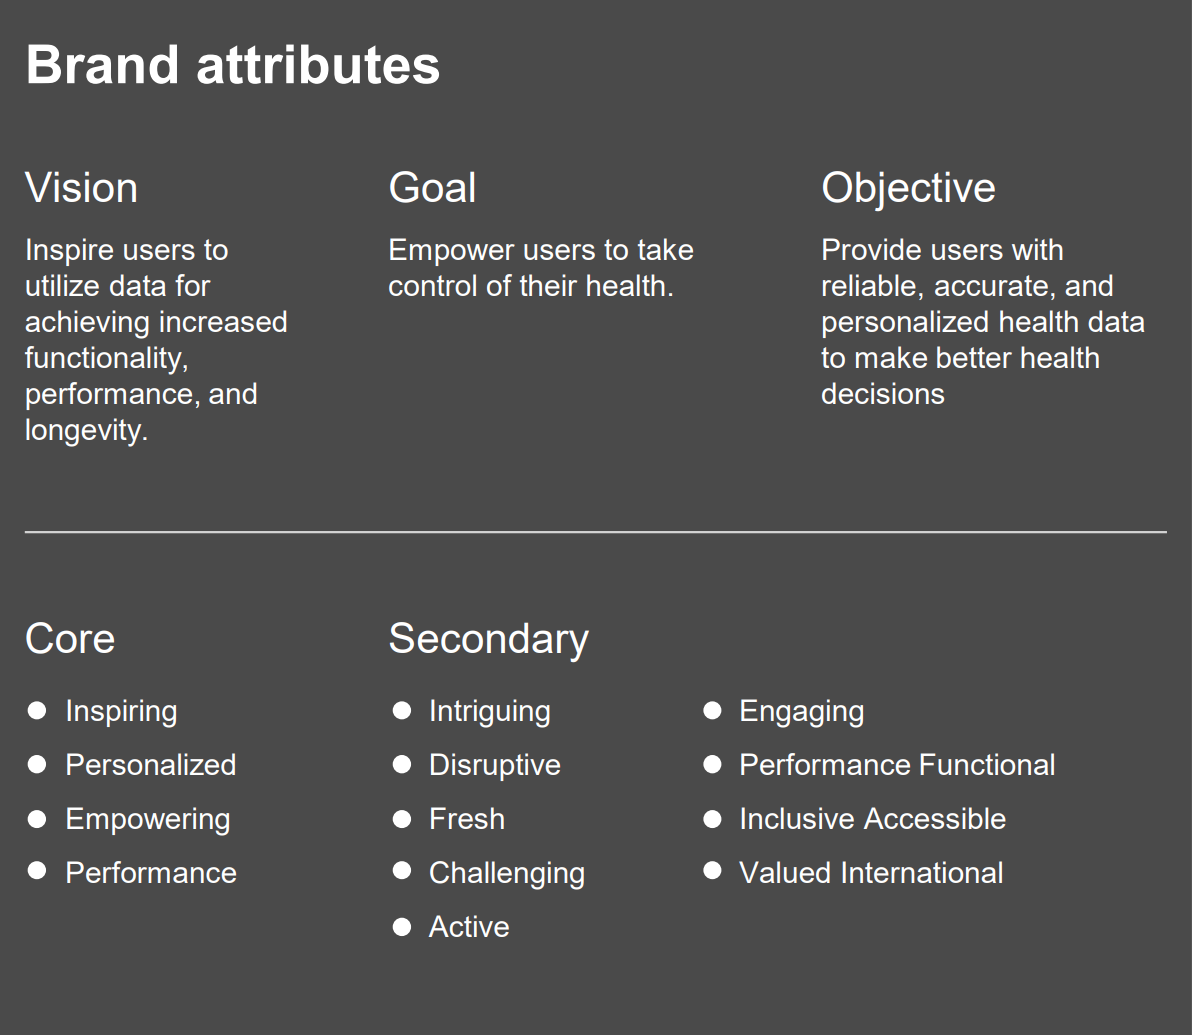 A list of brand attributes